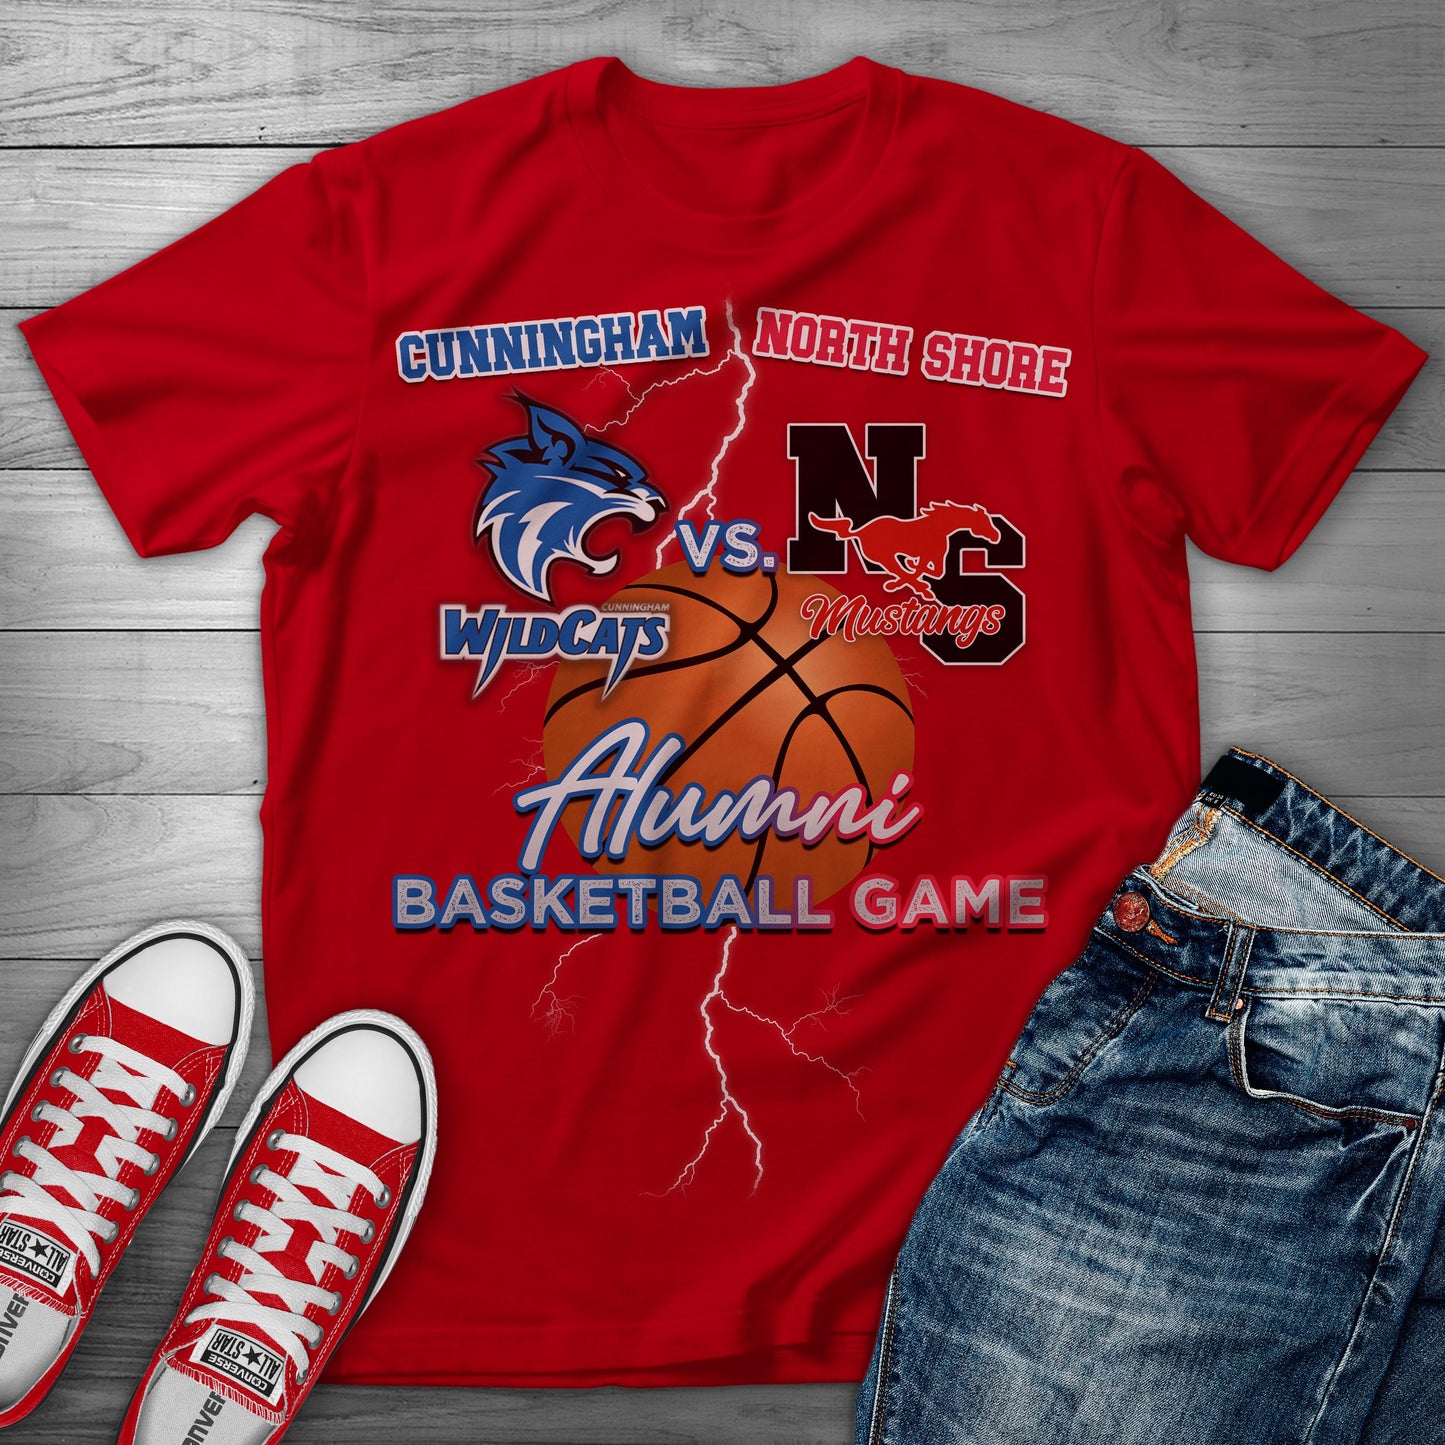 Alumni Basketball Game: North Shore MS vs Cunningham MS - SthrngurlCreations